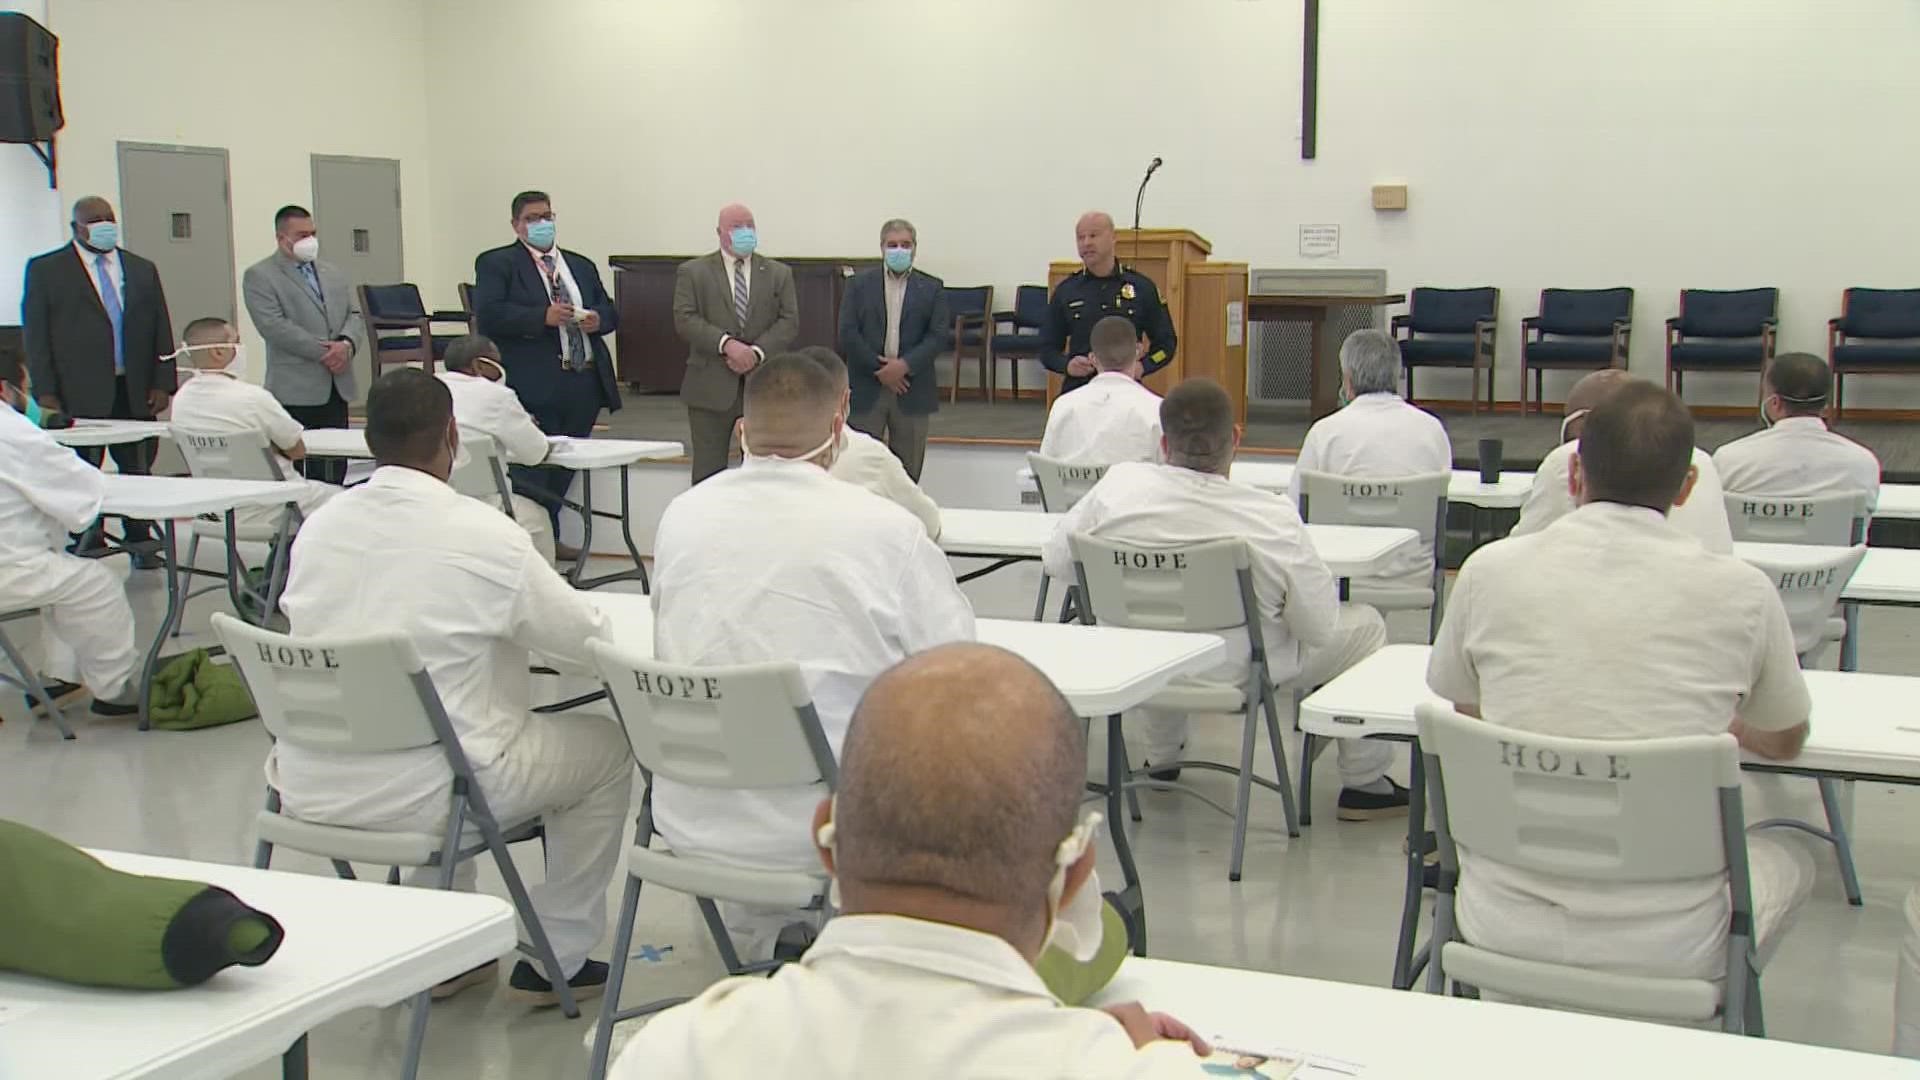 "By you succeeding, it means Dallas is safer," said Chief Eddie Garcia during his message to the inmates.